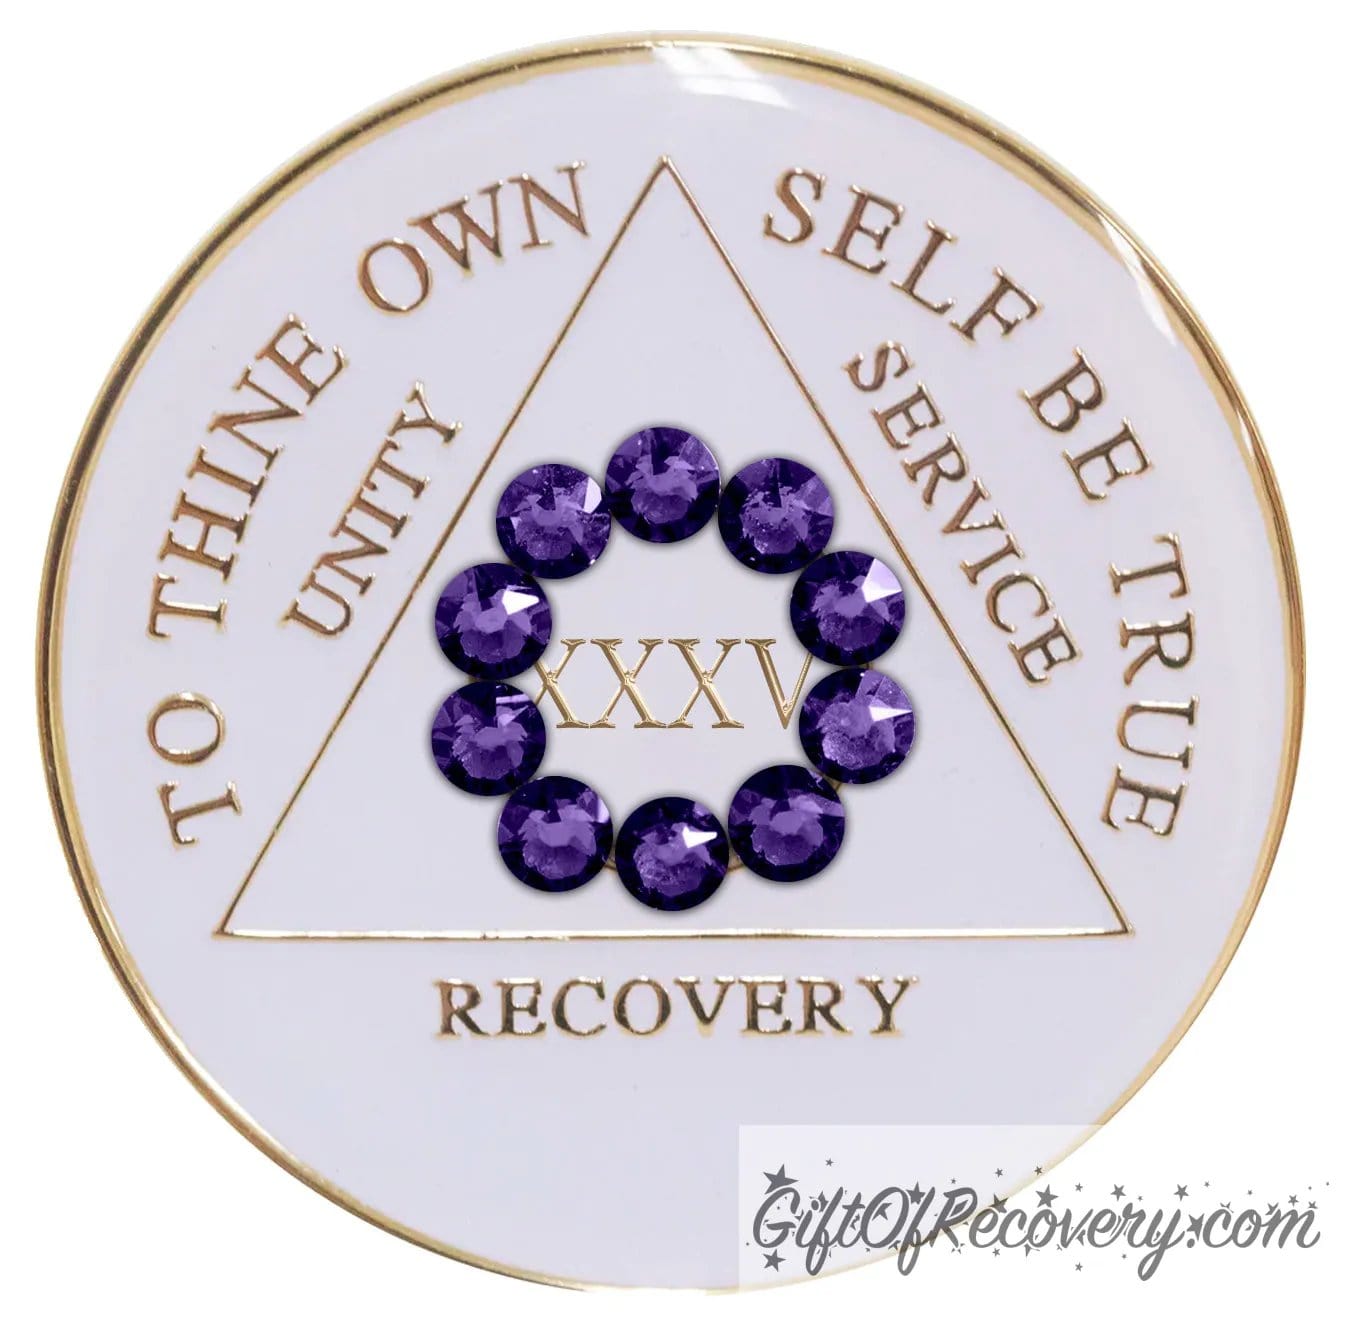 35 year AA medallion in pearl white with ten genuine purple velvet crystal in a circle representing our common welfare and personal recovery, to thine own self be true and other AA moto embossed with 14k gold-plated brass, the recovery medallion is sealed with resin for a scratch free shiny finish.